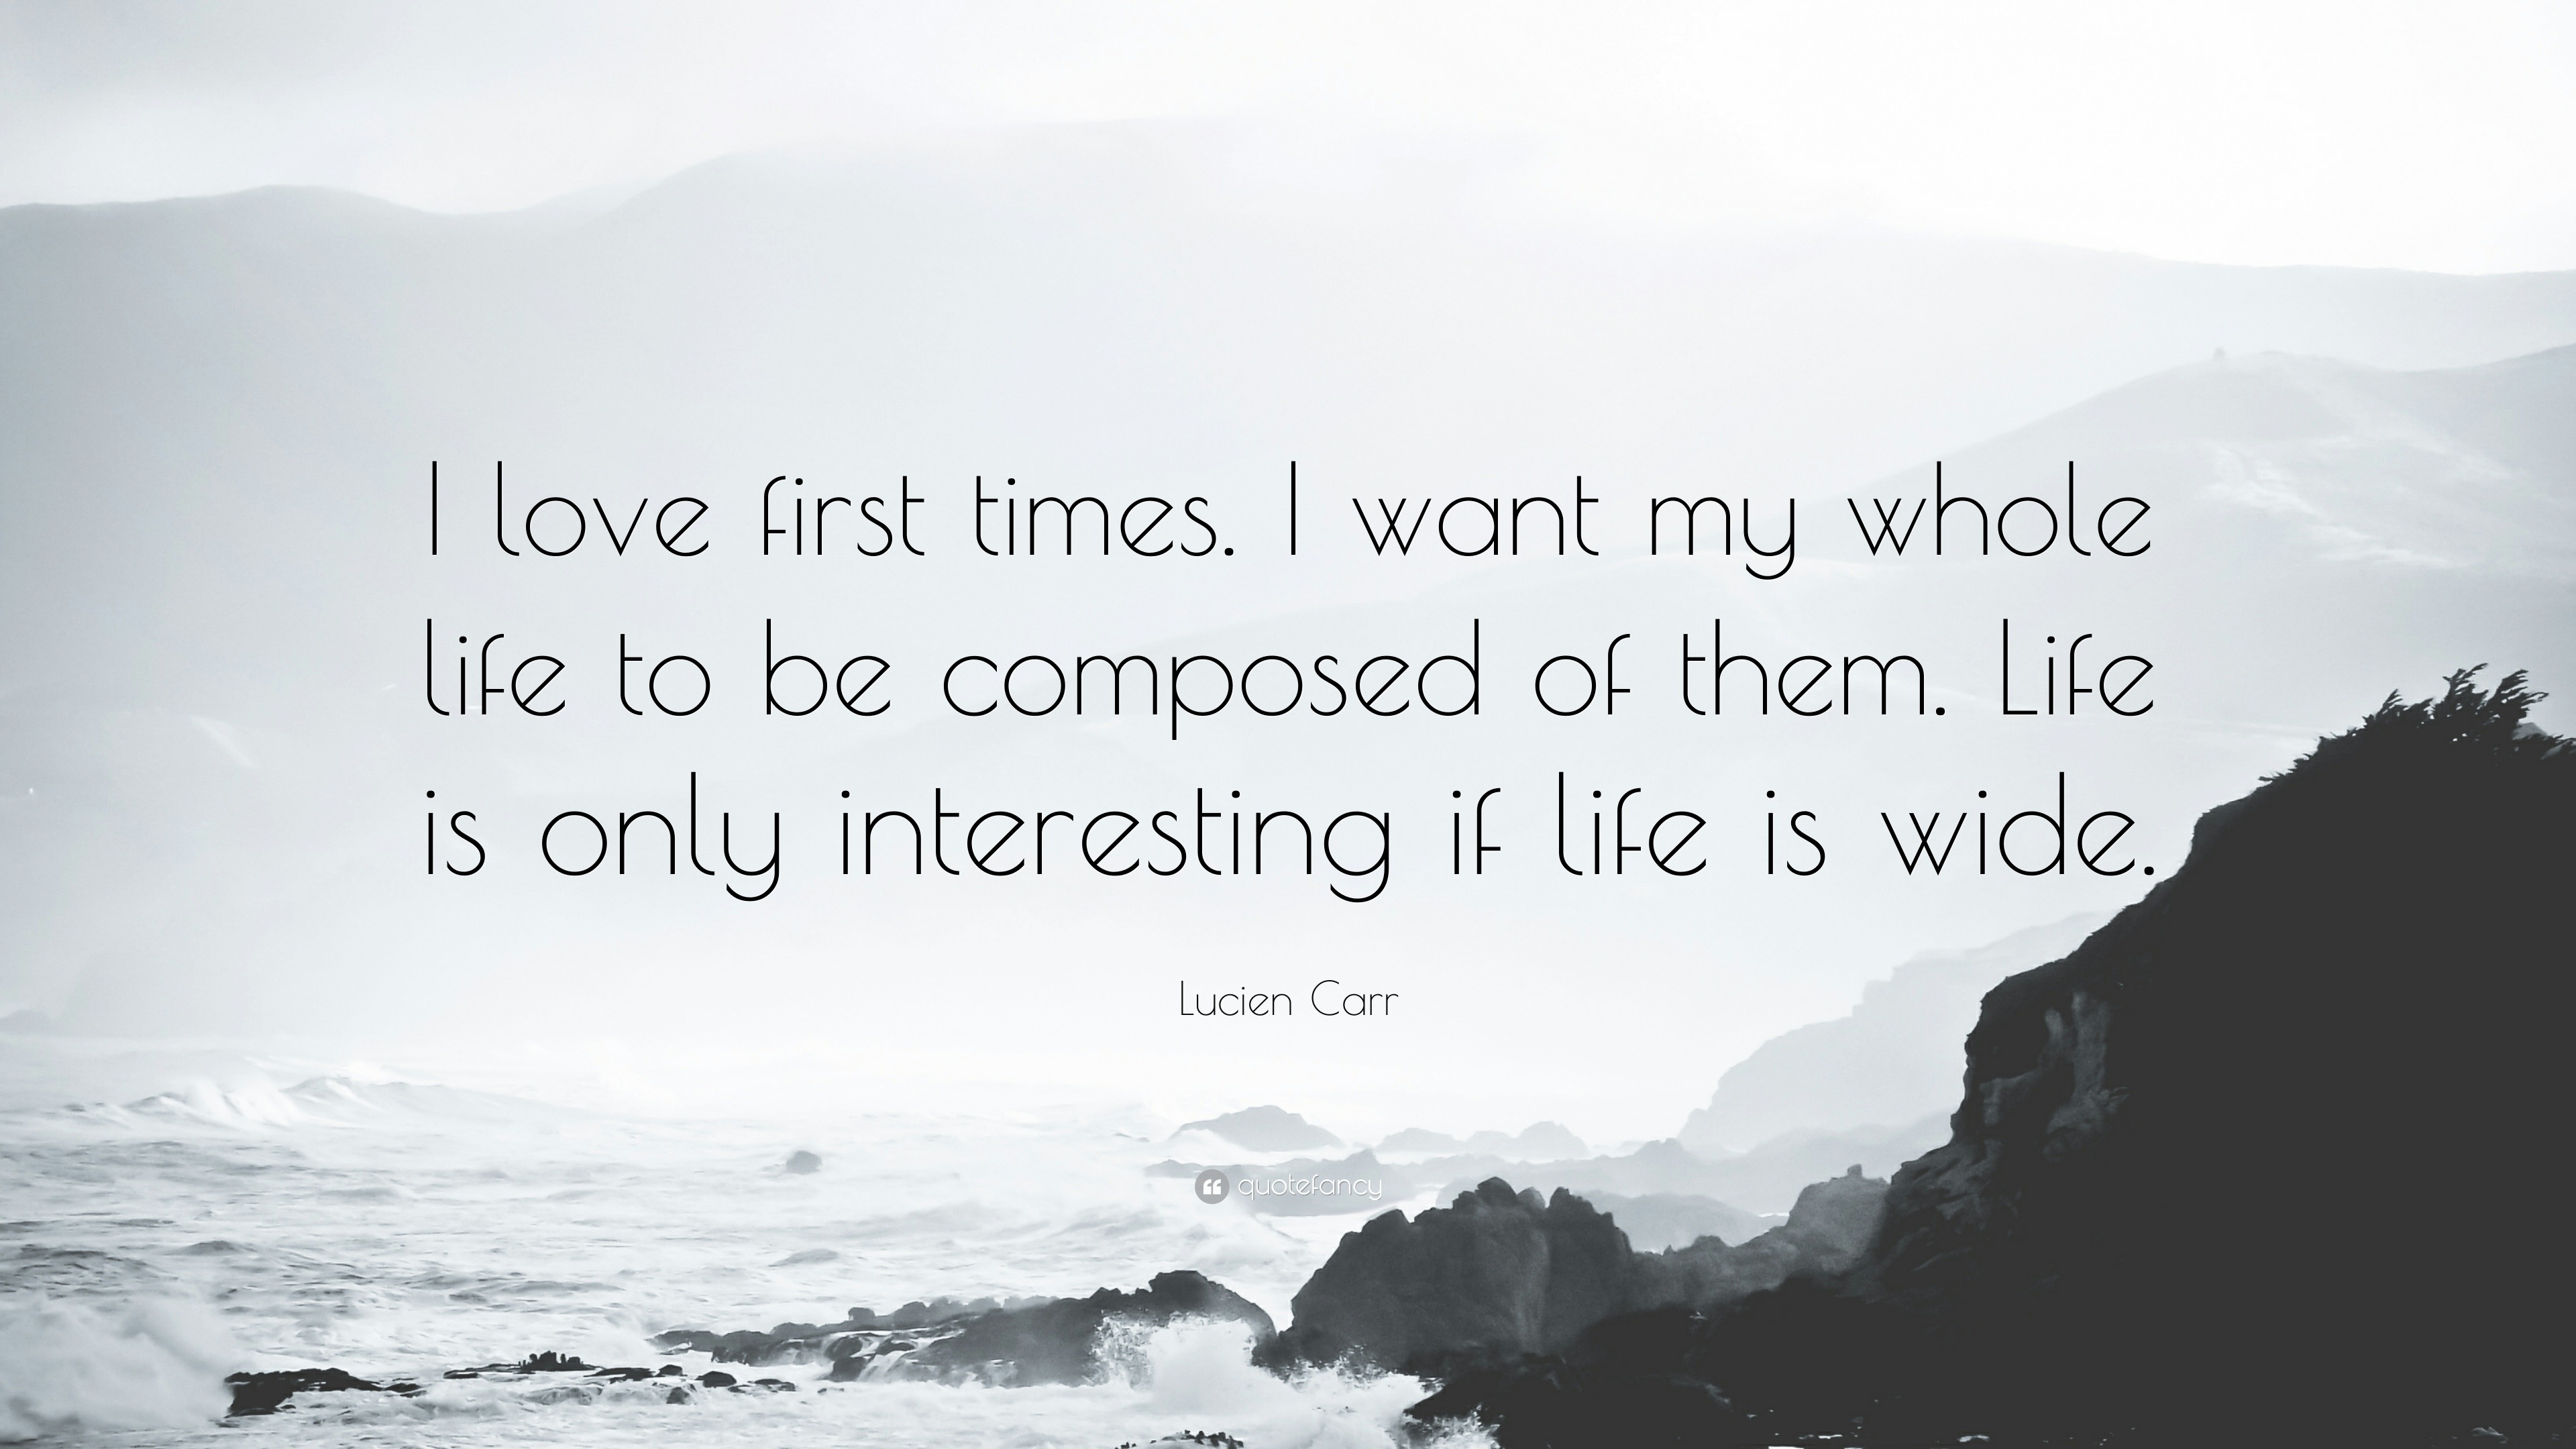 Lucien Carr Quote “I love first times I want my whole life to